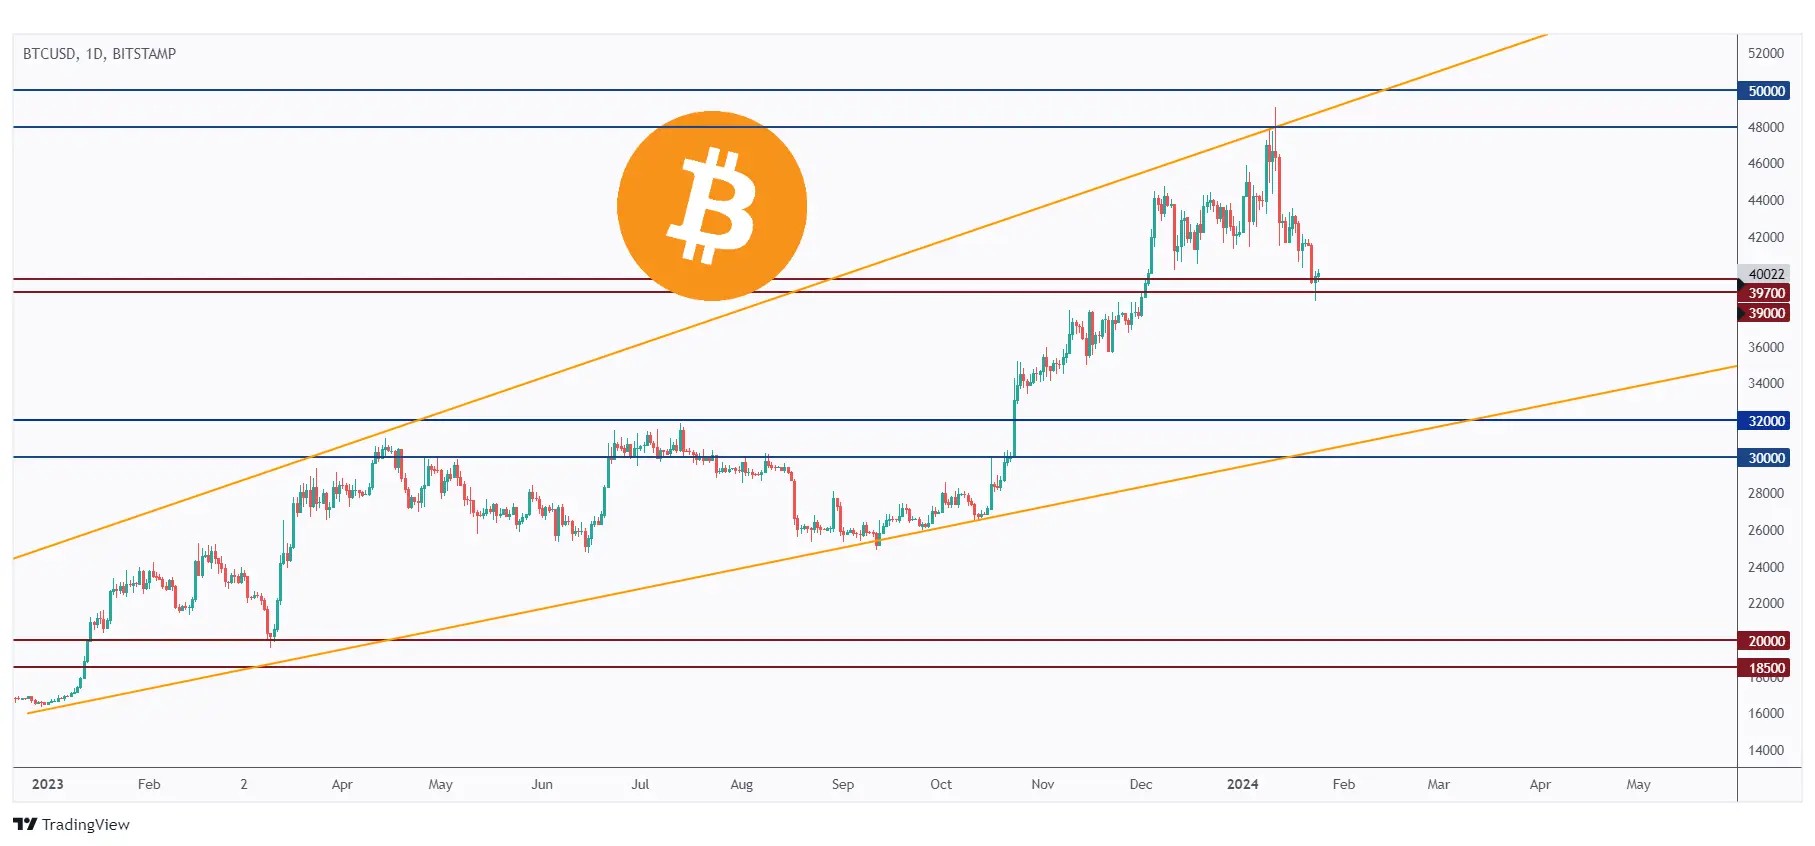 Bitcoin daily chart hovering around a support zone at $39,000.